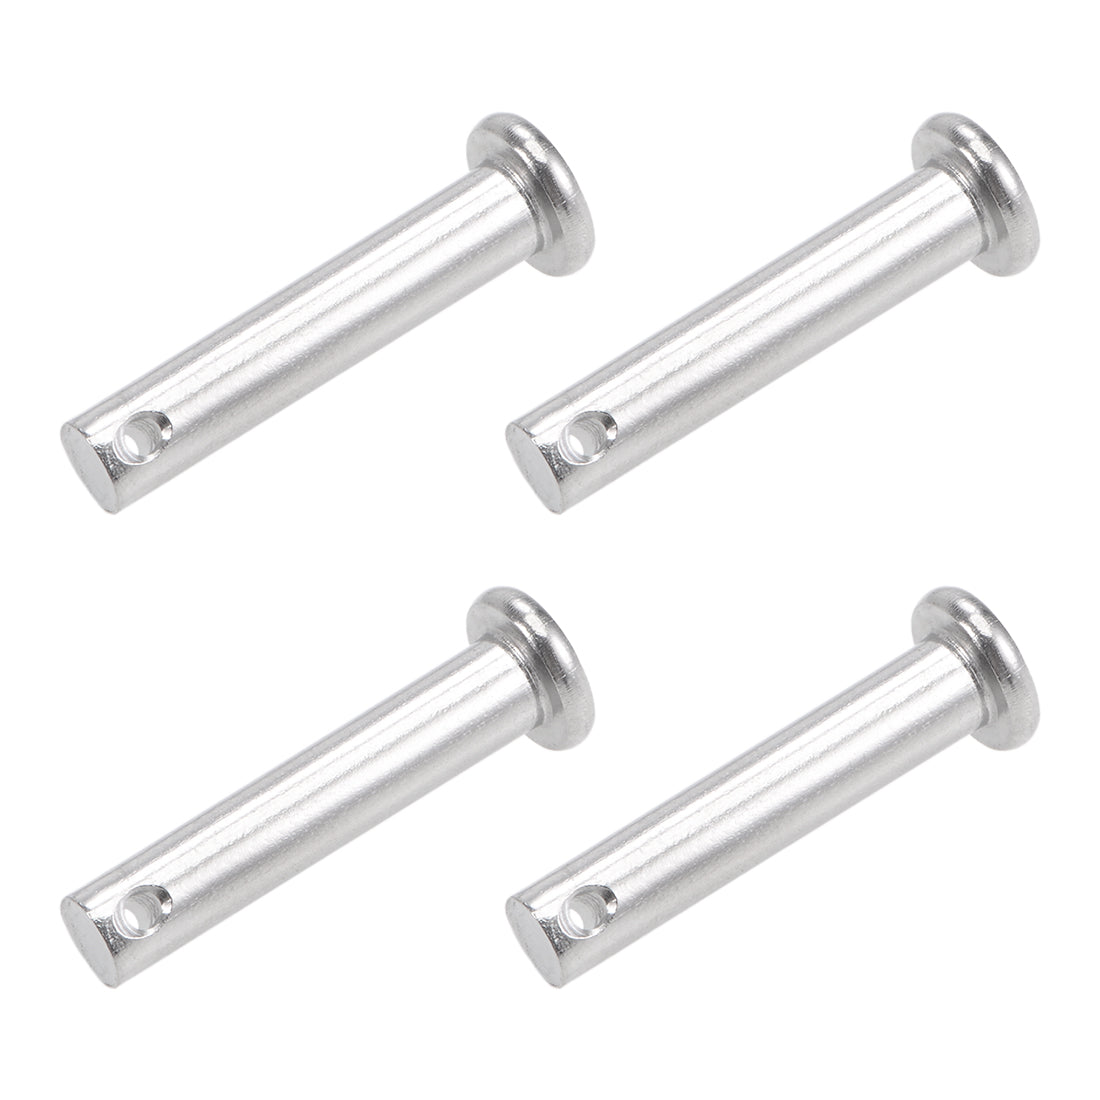 Uxcell Uxcell Single Hole Clevis Pins - 10mm x 60mm Flat Head 304 Stainless Steel Link Hinge Pin 4Pcs